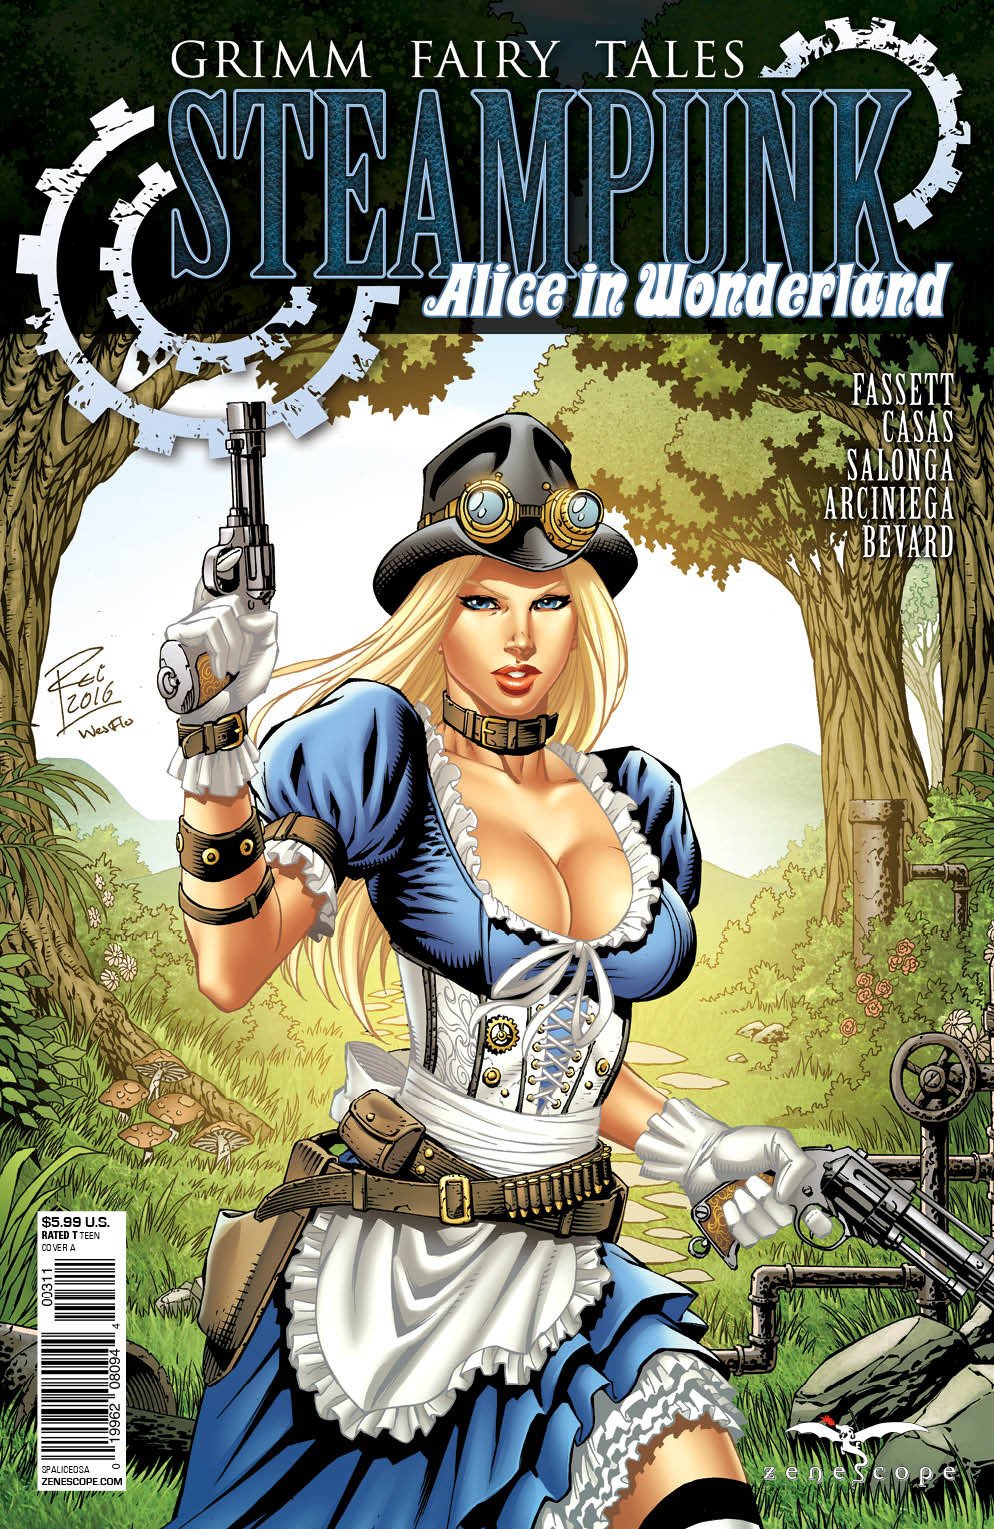 Image of Grimm Fairy Tales Steampunk: Alice In Wonderland One-Shot